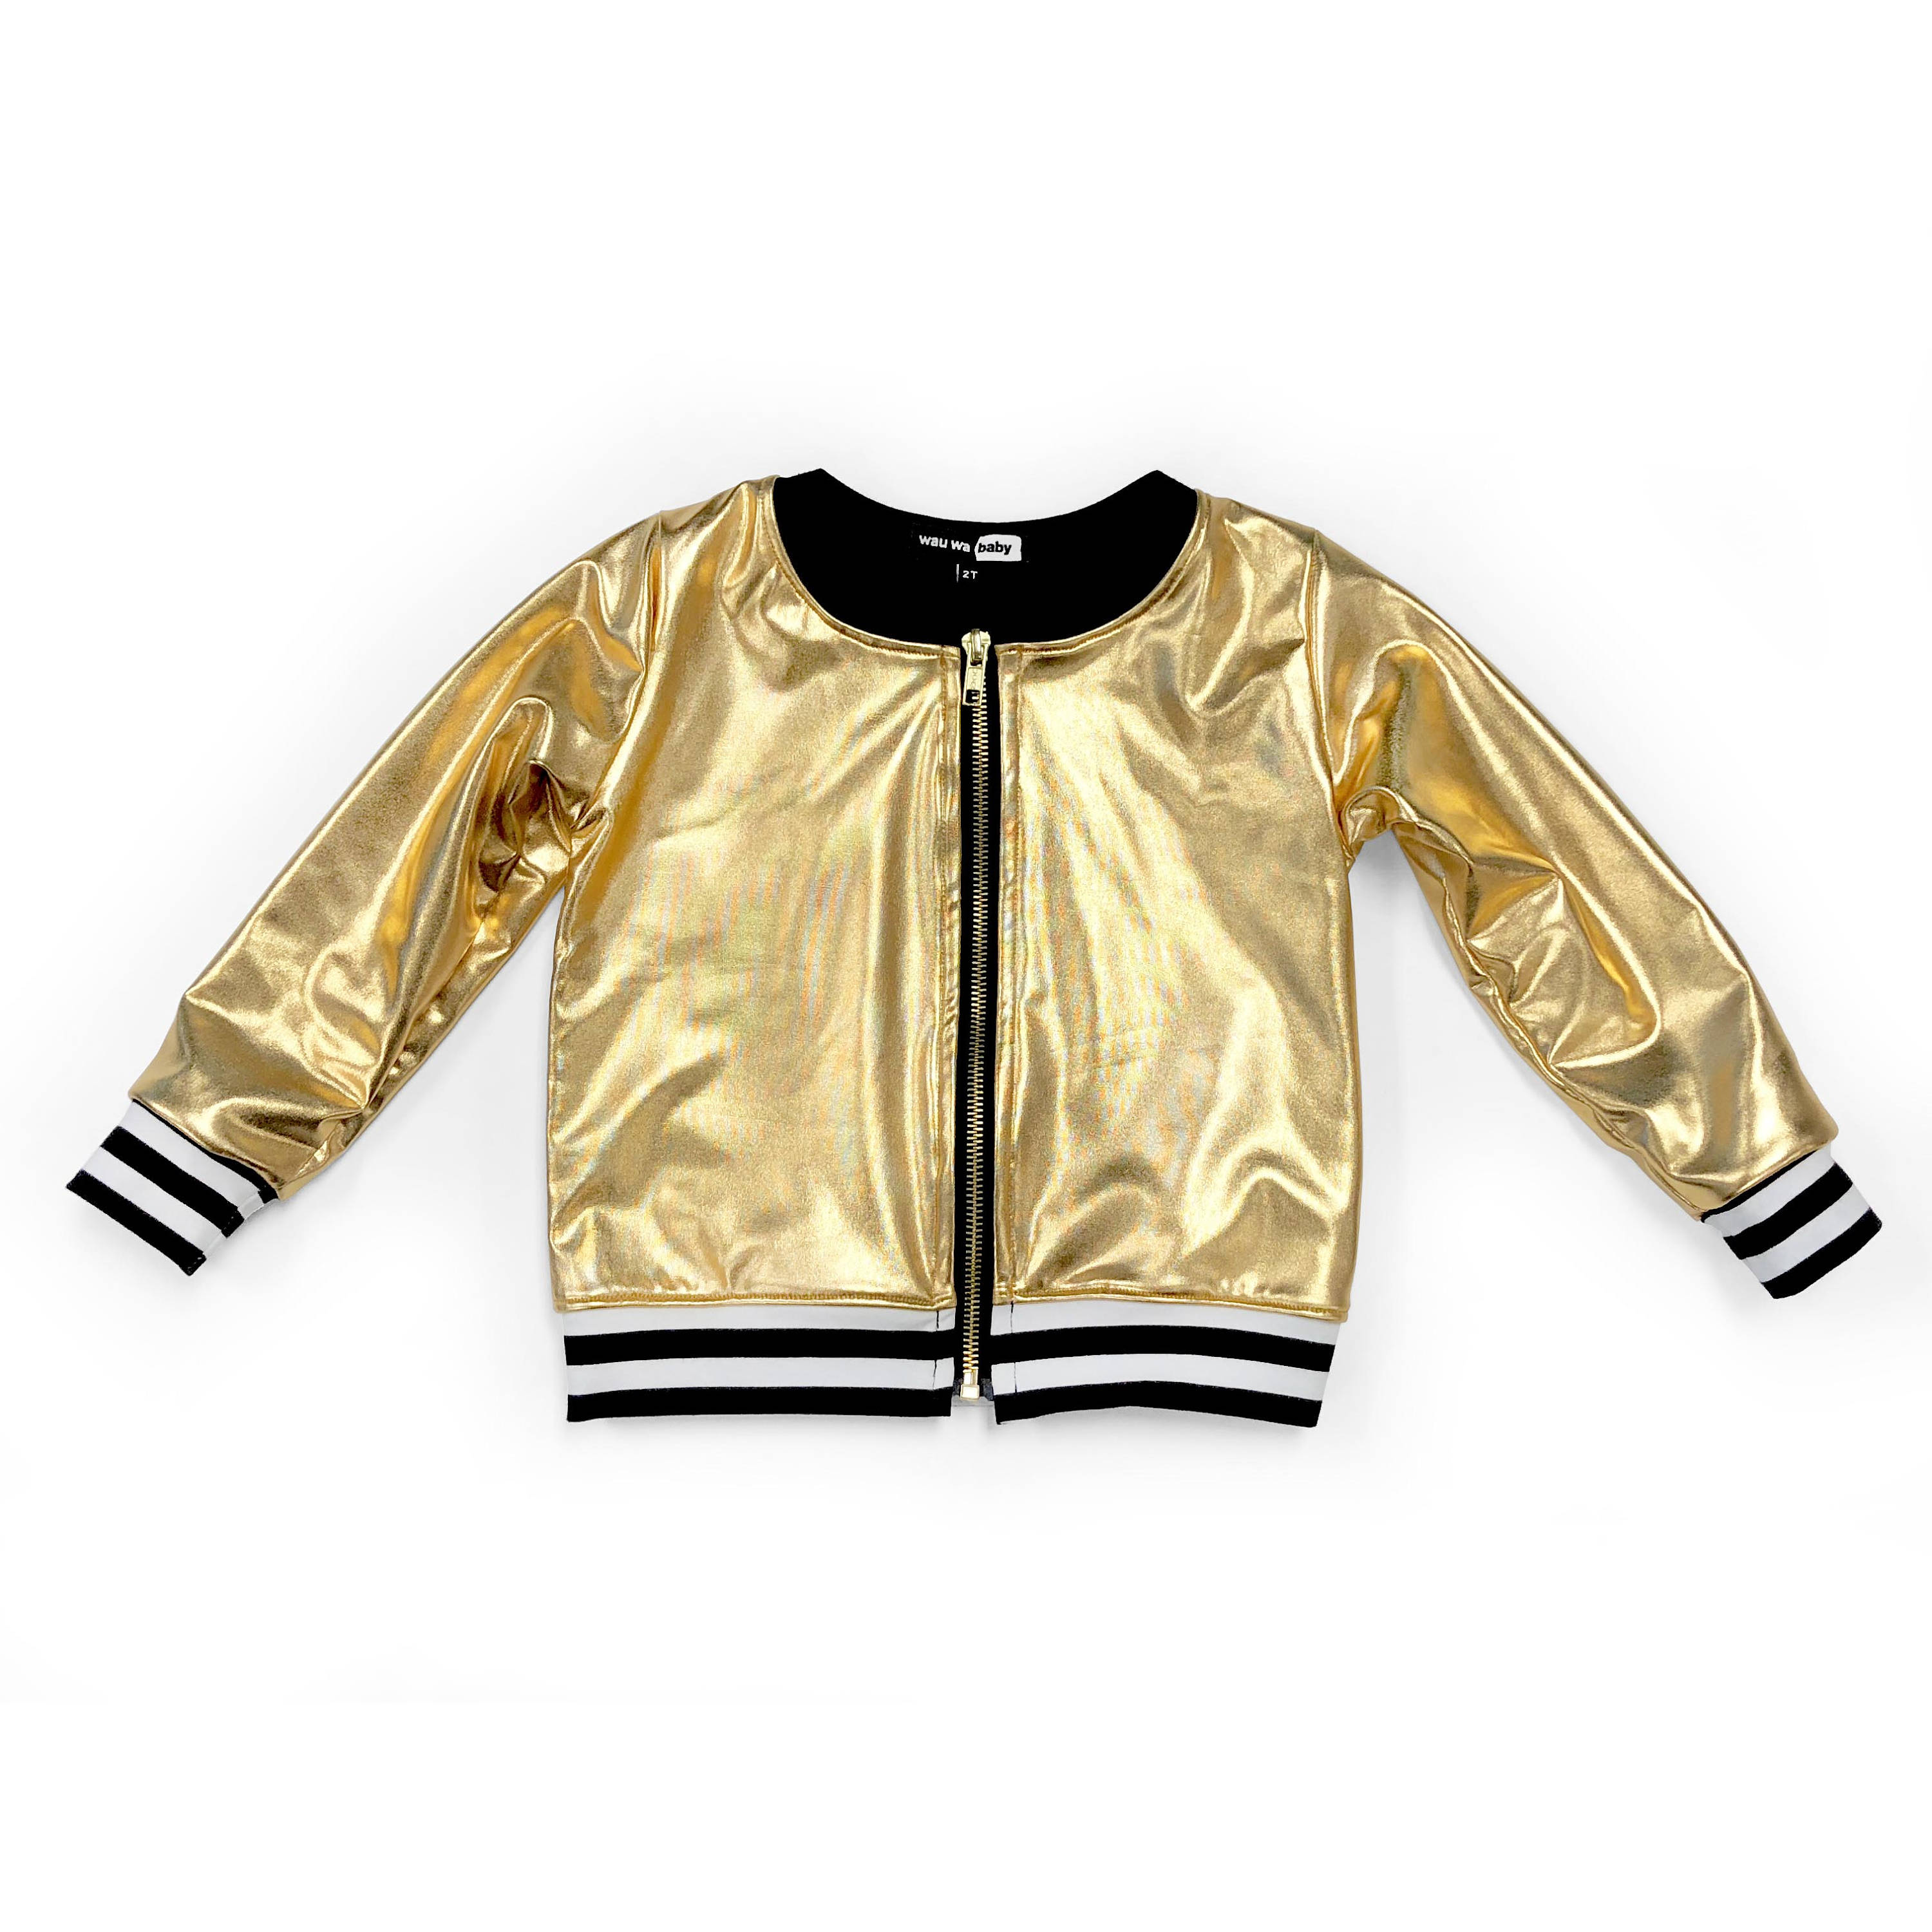 Gold Bomber Jacket, Toddler Bomber Jacket, Baby Bomber Jacket, Gold Jacket,  Bomber Jacket, Toddler Clothes, Baby Clothes, Toddler Outfit 